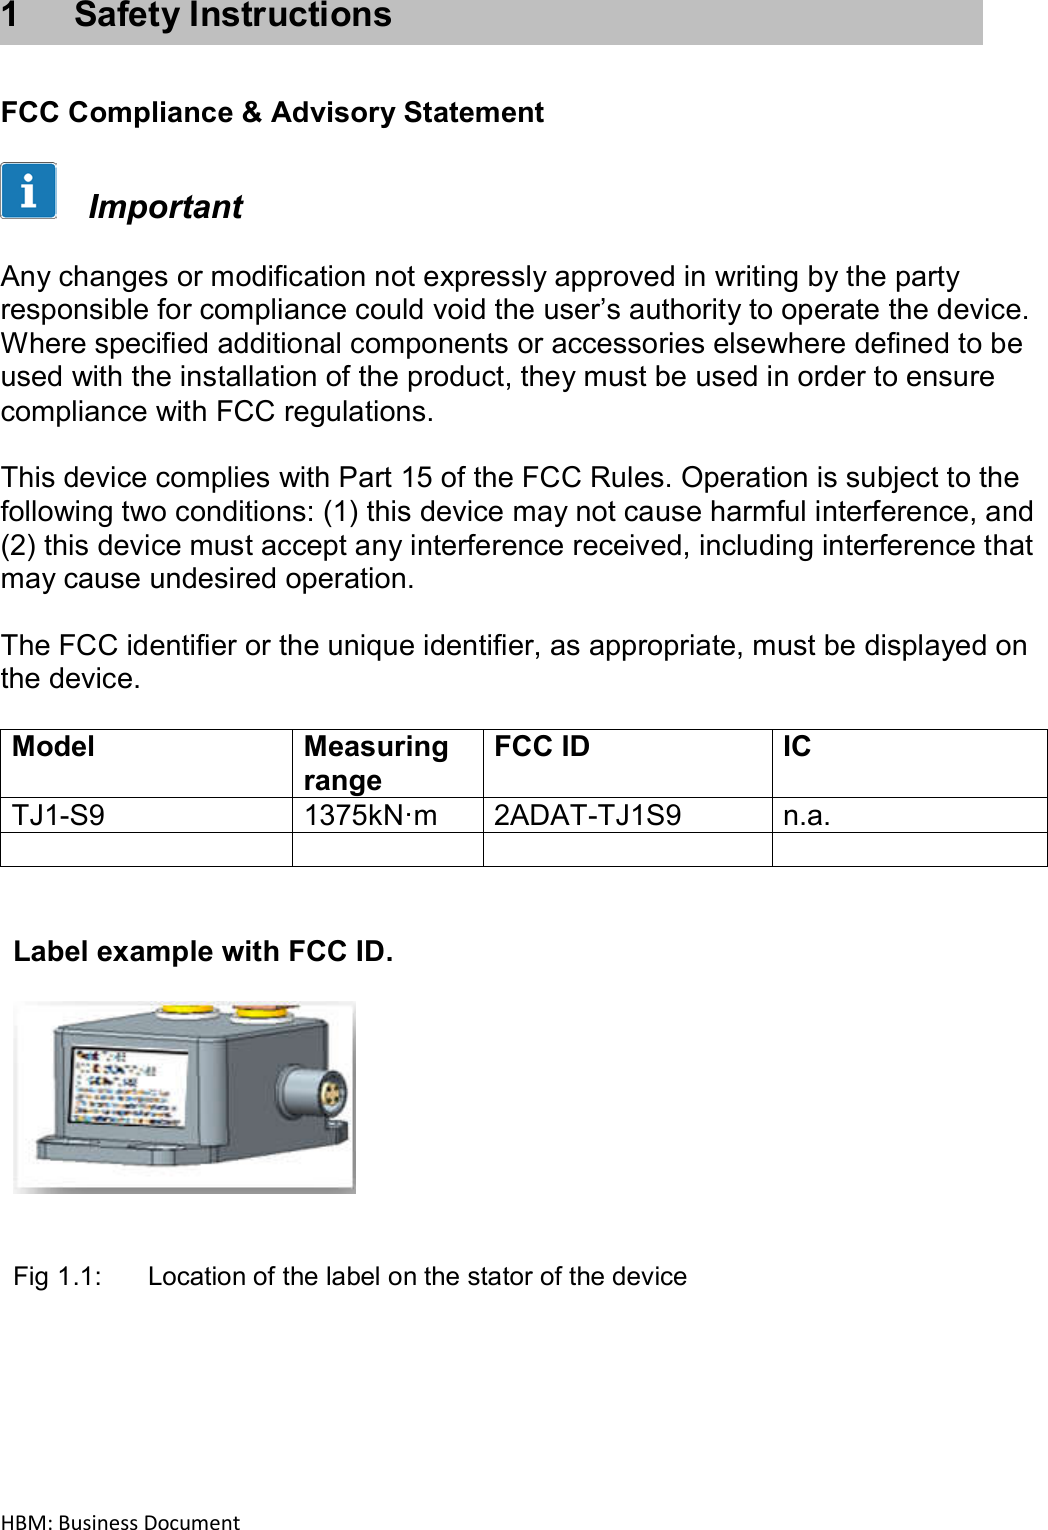 HBM: Business Document   1  Safety Instructions    FCC Compliance &amp; Advisory Statement        Important   Any changes or modification not expressly approved in writing by the party responsible for compliance could void the user’s authority to operate the device. Where specified additional components or accessories elsewhere defined to be used with the installation of the product, they must be used in order to ensure compliance with FCC regulations.   This device complies with Part 15 of the FCC Rules. Operation is subject to the following two conditions: (1) this device may not cause harmful interference, and (2) this device must accept any interference received, including interference that may cause undesired operation.  The FCC identifier or the unique identifier, as appropriate, must be displayed on the device.  Model  Measuring range FCC ID  IC TJ1-S9  1375kN·m  2ADAT-TJ1S9  n.a.          Label example with FCC ID.     Fig 1.1:  Location of the label on the stator of the device    